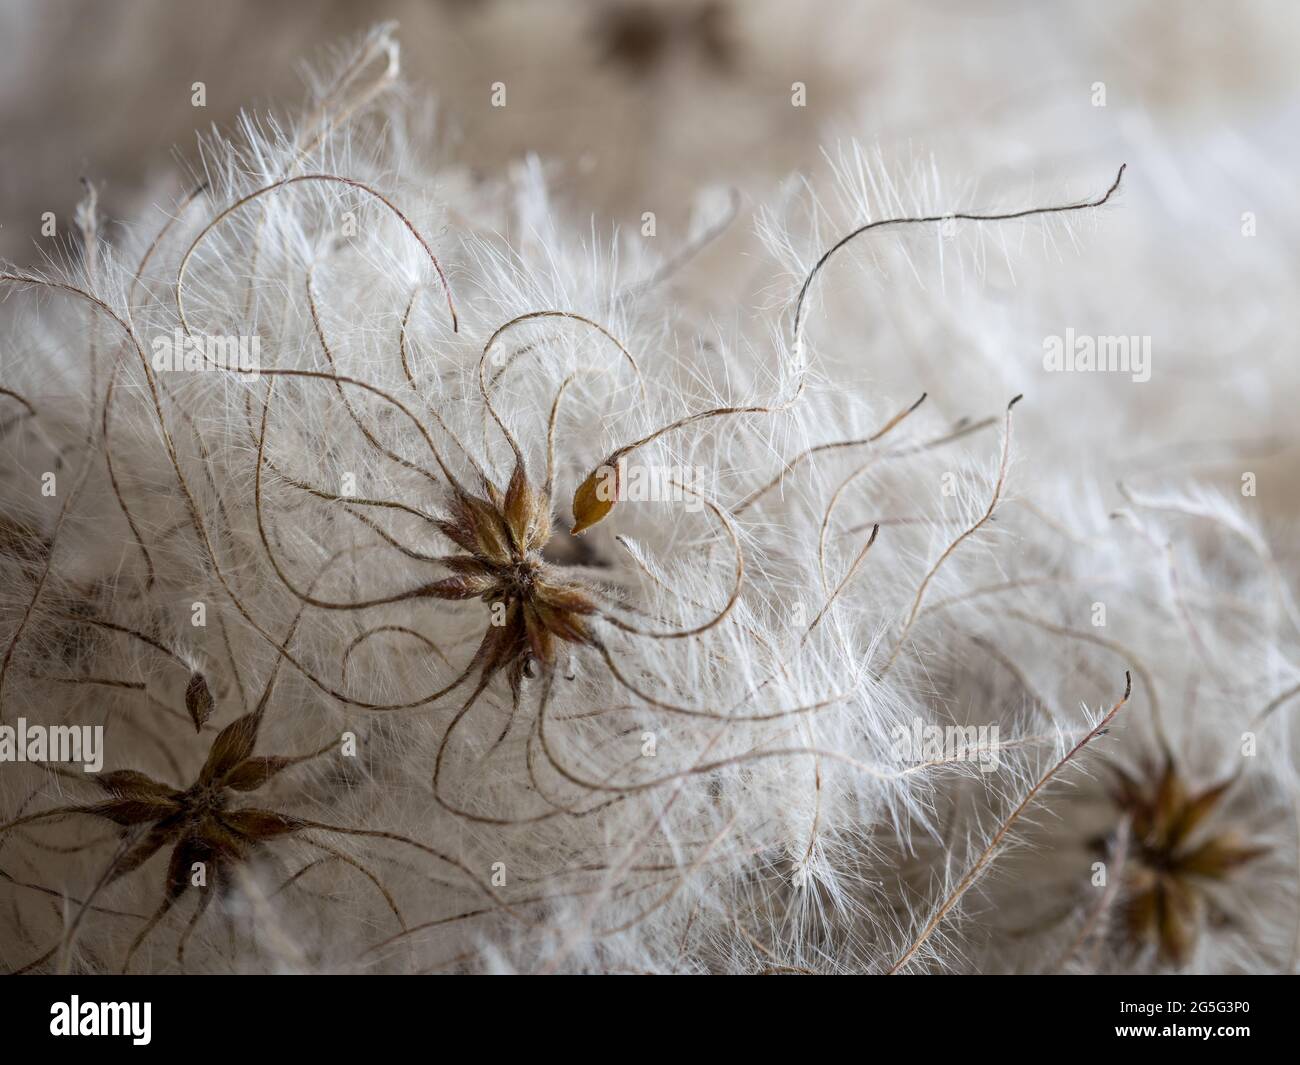 a full frame close up macro detail view of elegant delicate clemetis fluffly puffball seedhead seeds with flowing tendrills tails waving curling backl Stock Photo